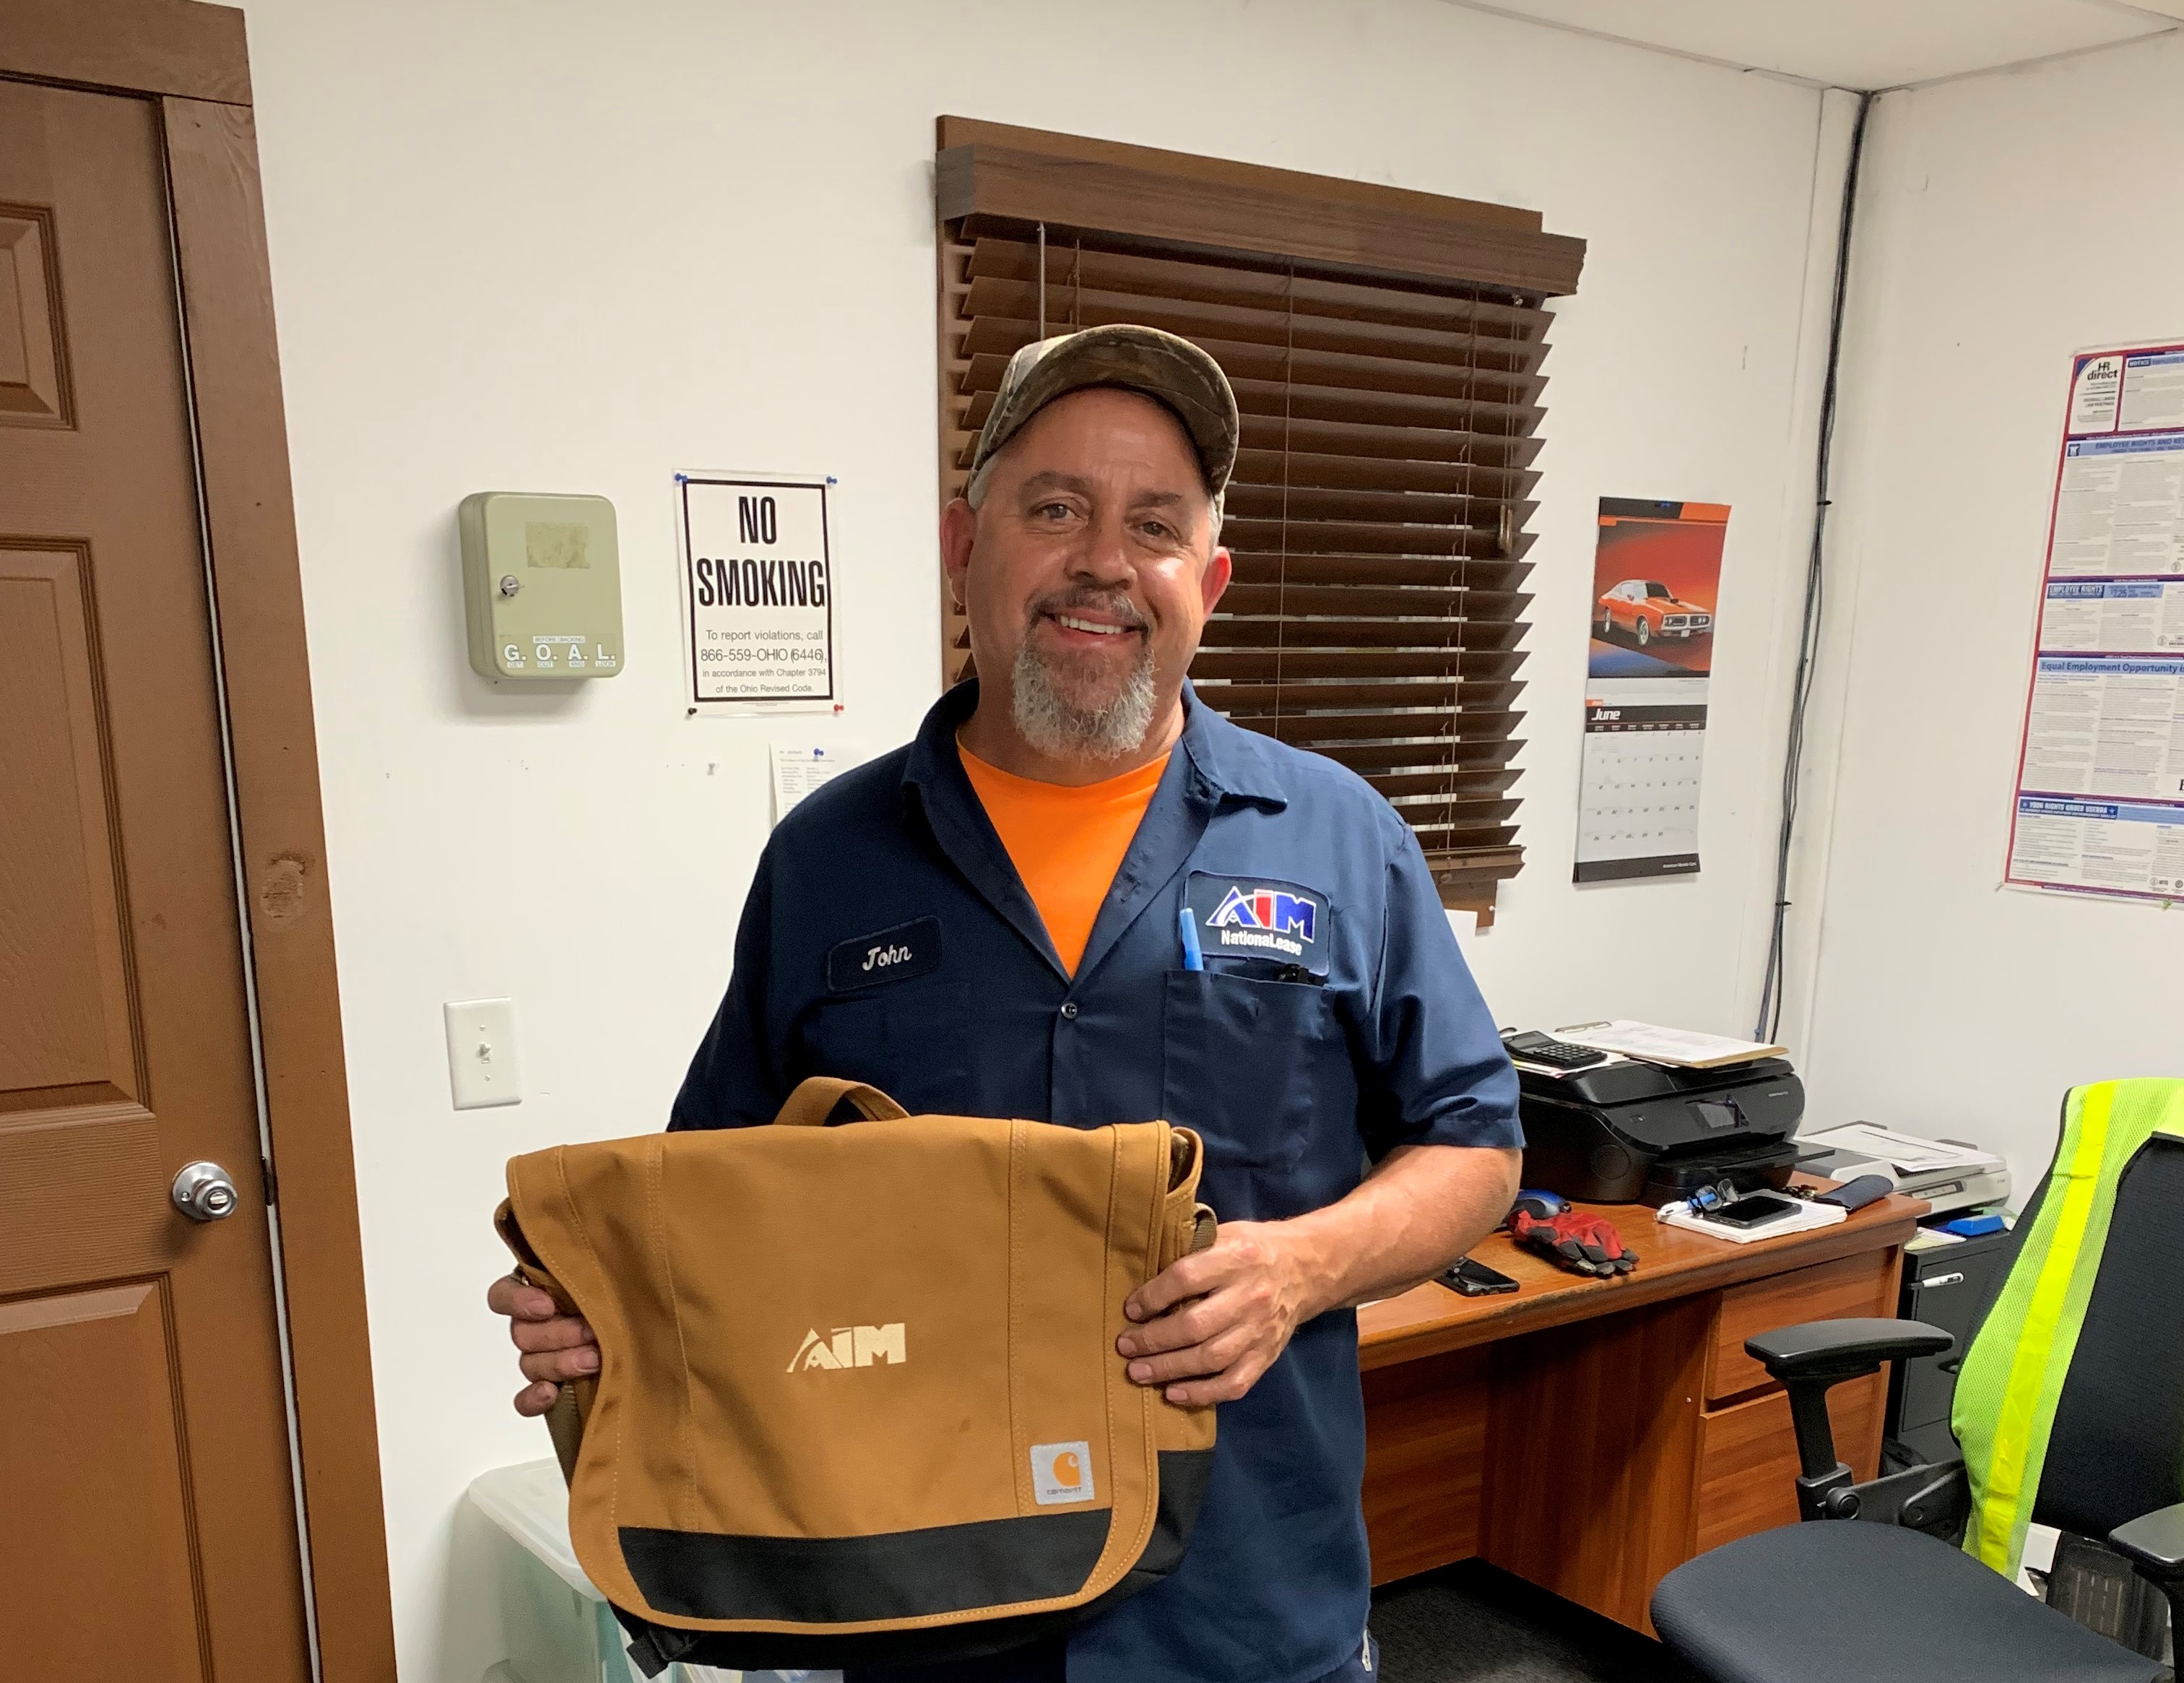 In recognition of his performance, John Hinkle received an Aim Carhartt laptop bag and a gift card.